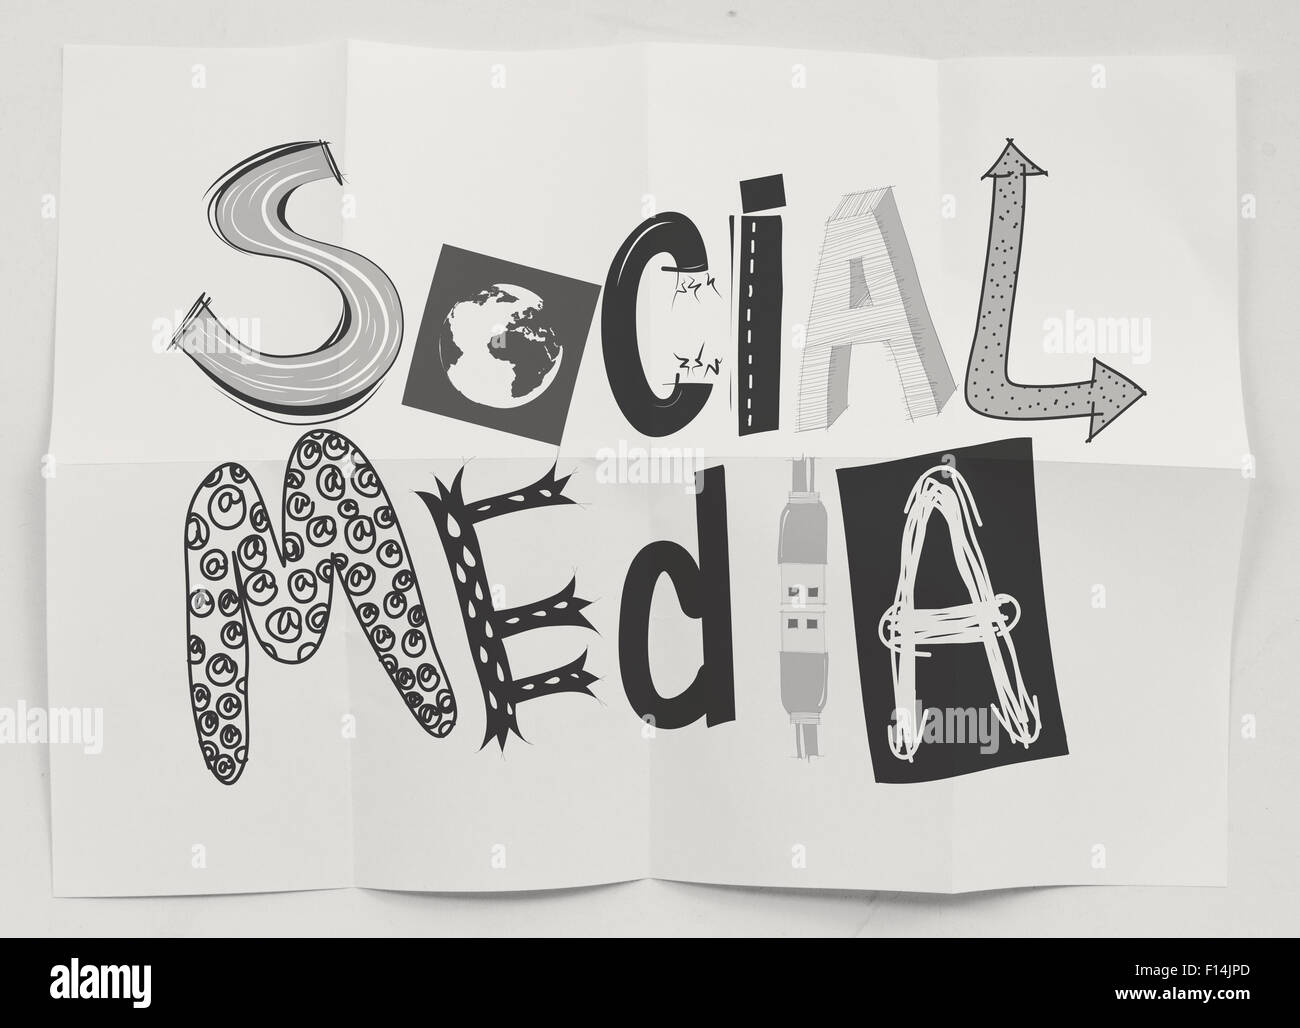 hand drawn social media icons on crumpled paper background as concept Stock Photo